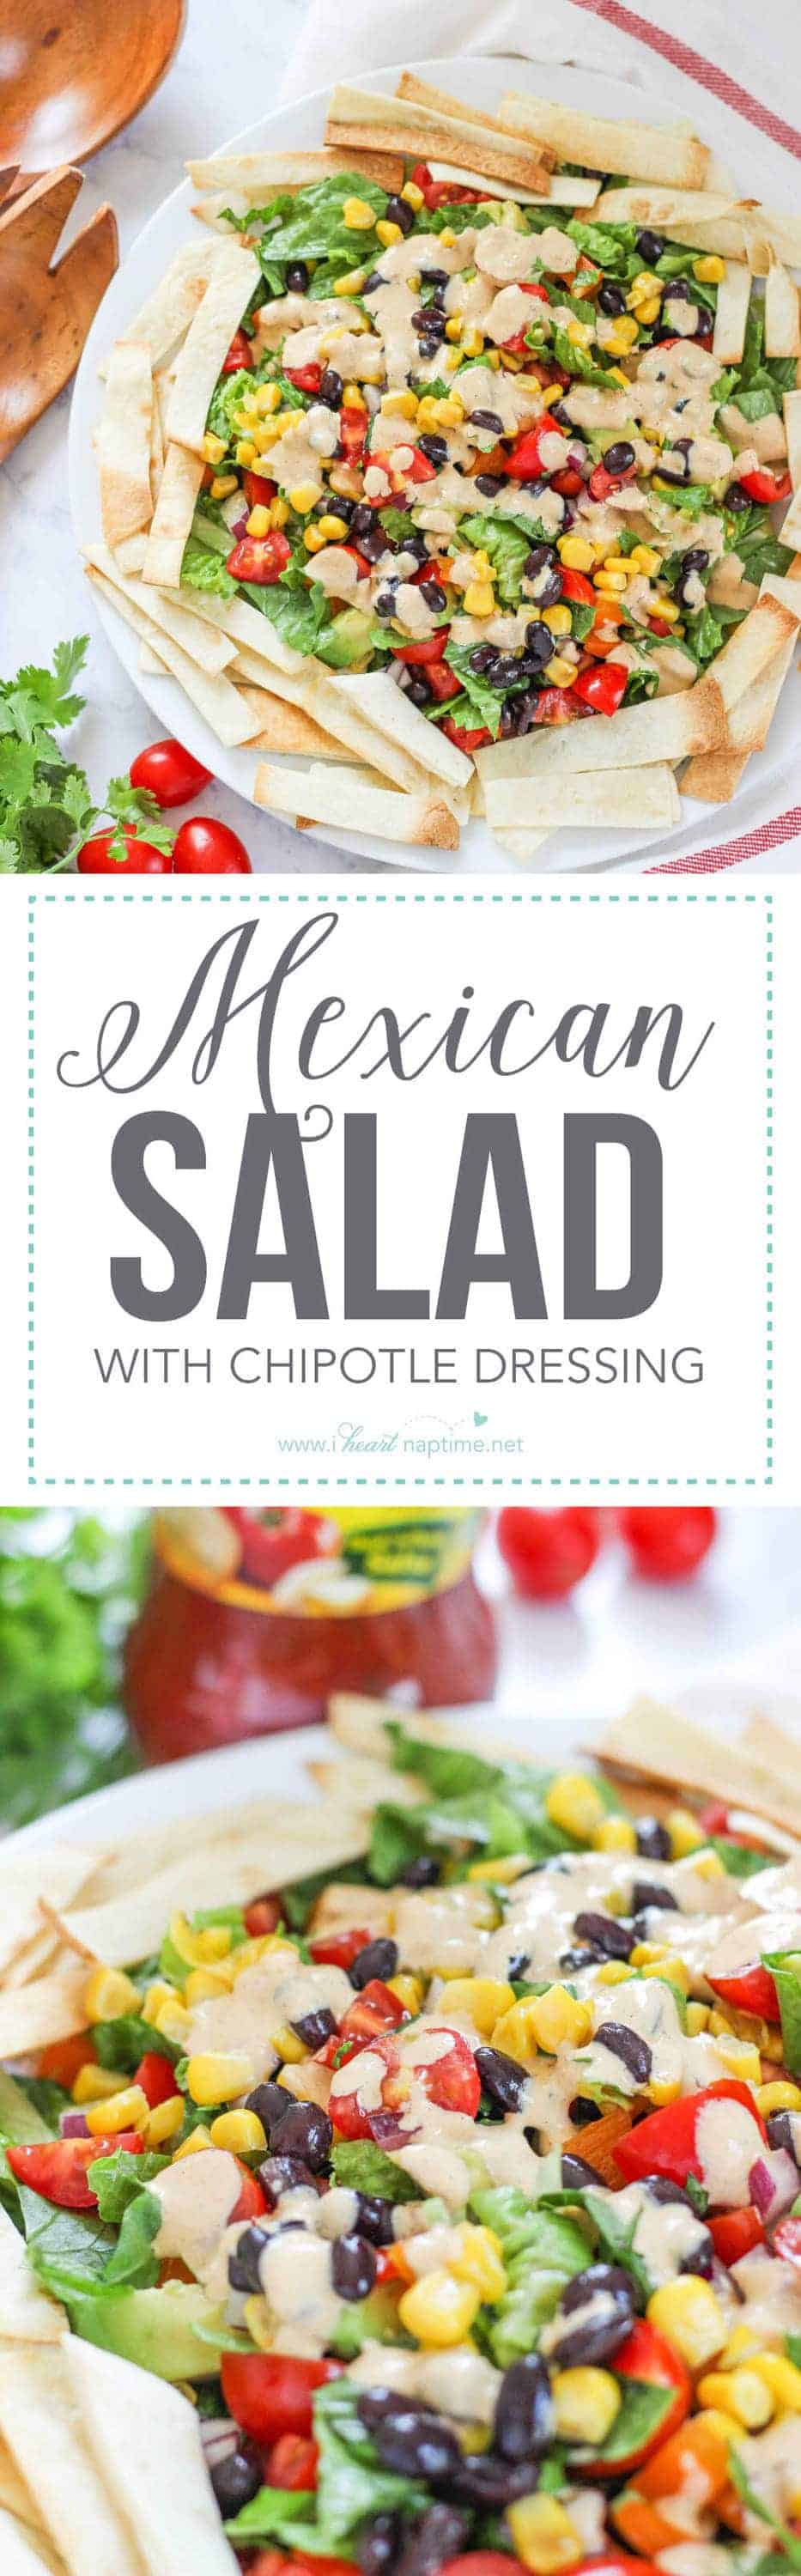 mexican salad with chipotle dressing